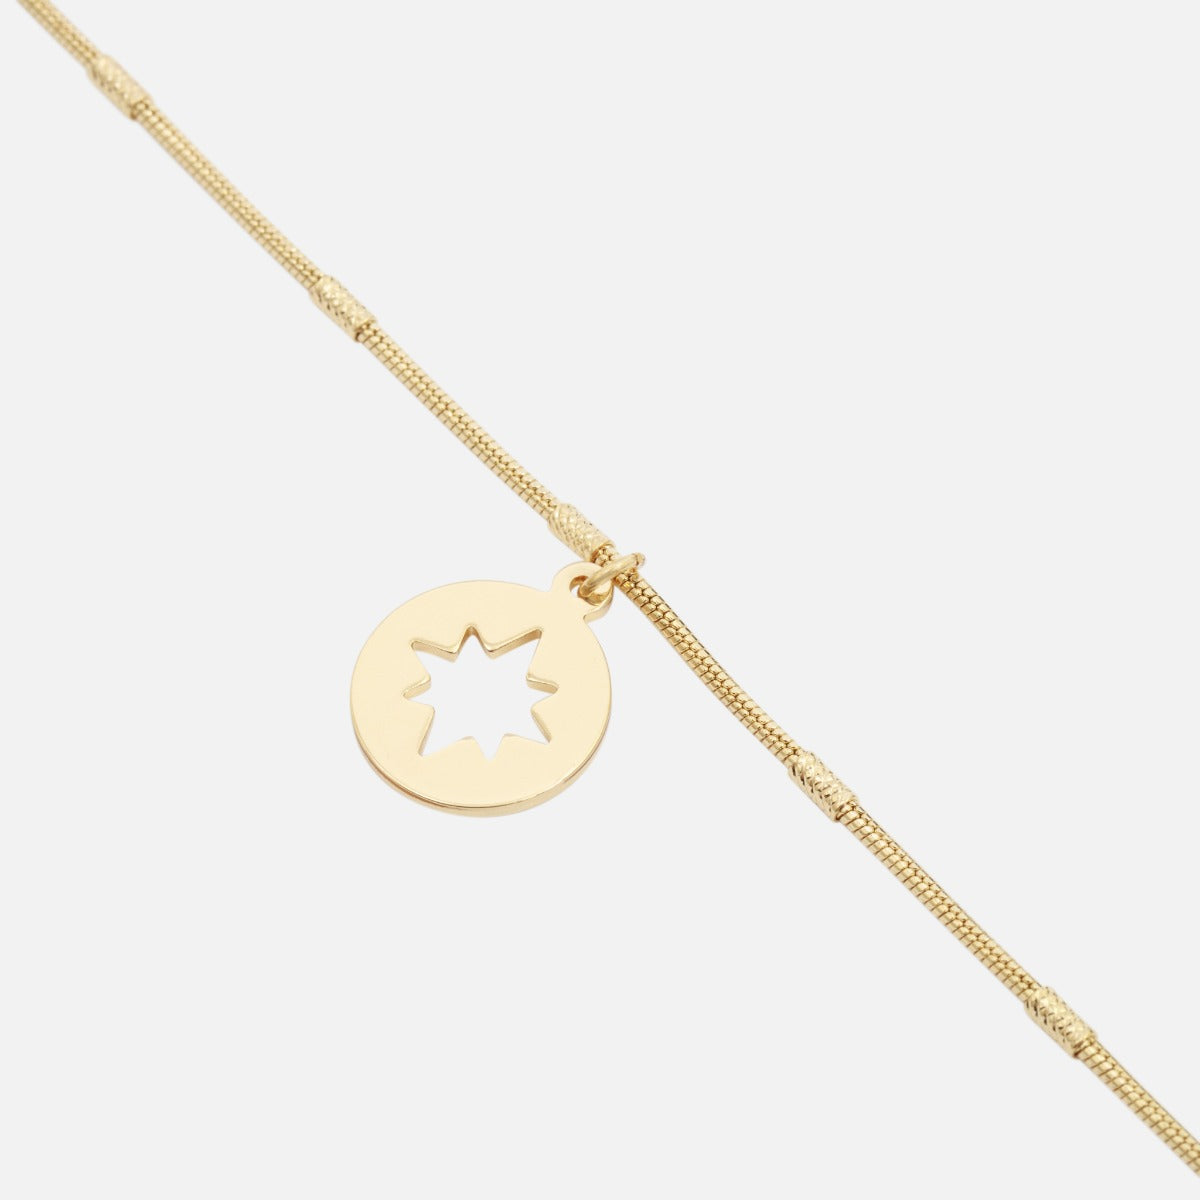 Golden ankle chain with star medallion